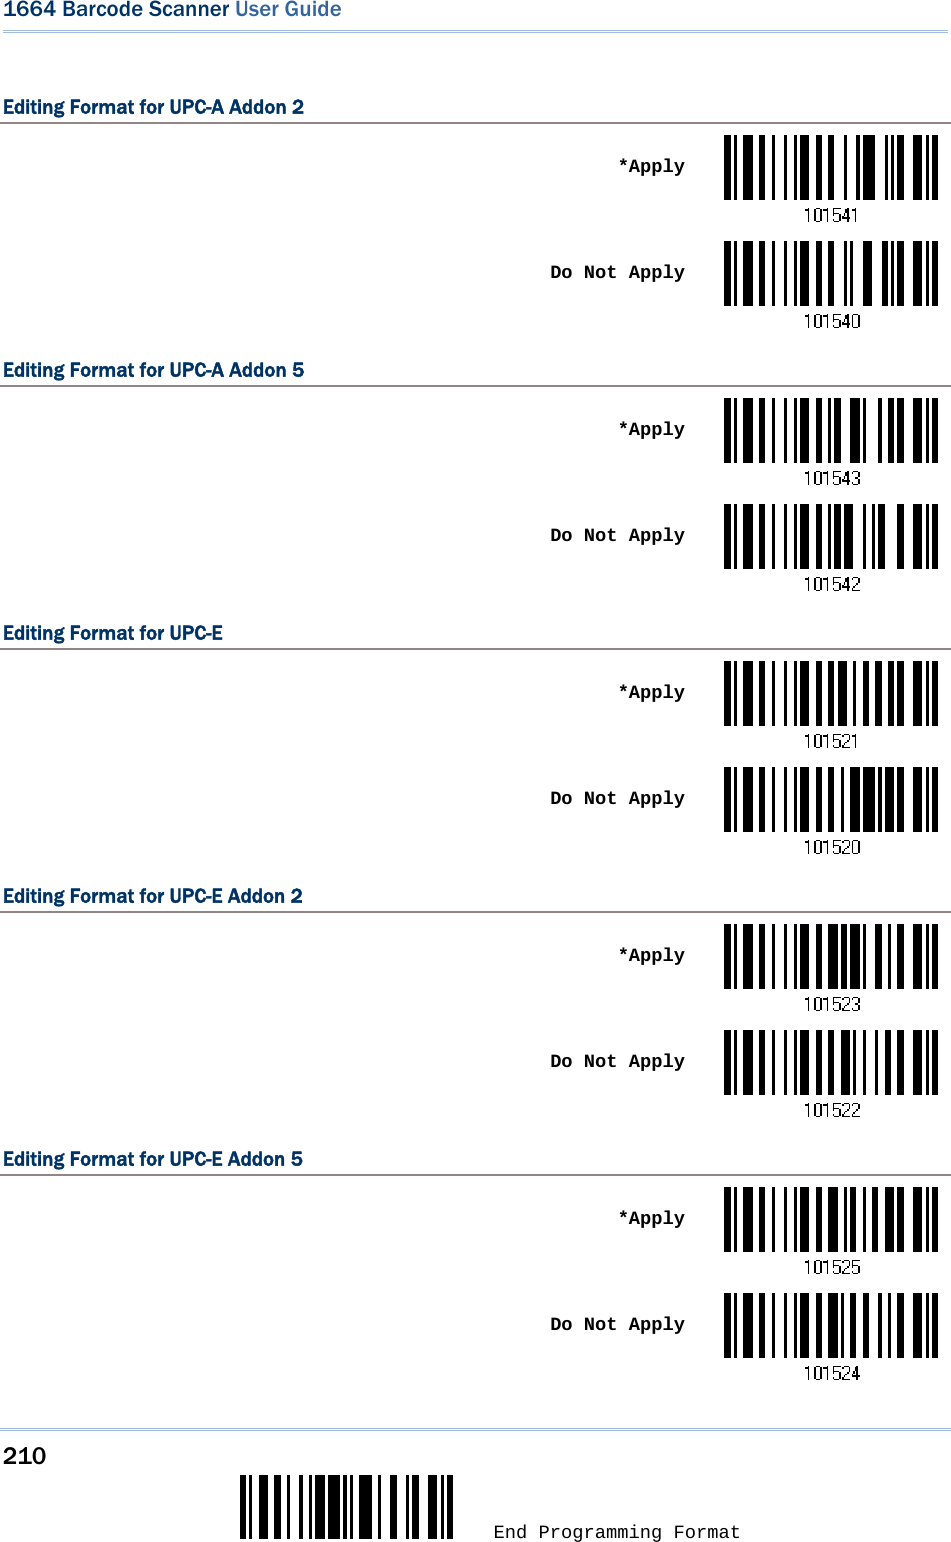 210  End Programming Format 1664 Barcode Scanner User Guide  Editing Format for UPC-A Addon 2  *Apply Do Not ApplyEditing Format for UPC-A Addon 5  *Apply Do Not ApplyEditing Format for UPC-E  *Apply Do Not ApplyEditing Format for UPC-E Addon 2  *Apply Do Not ApplyEditing Format for UPC-E Addon 5  *Apply Do Not Apply